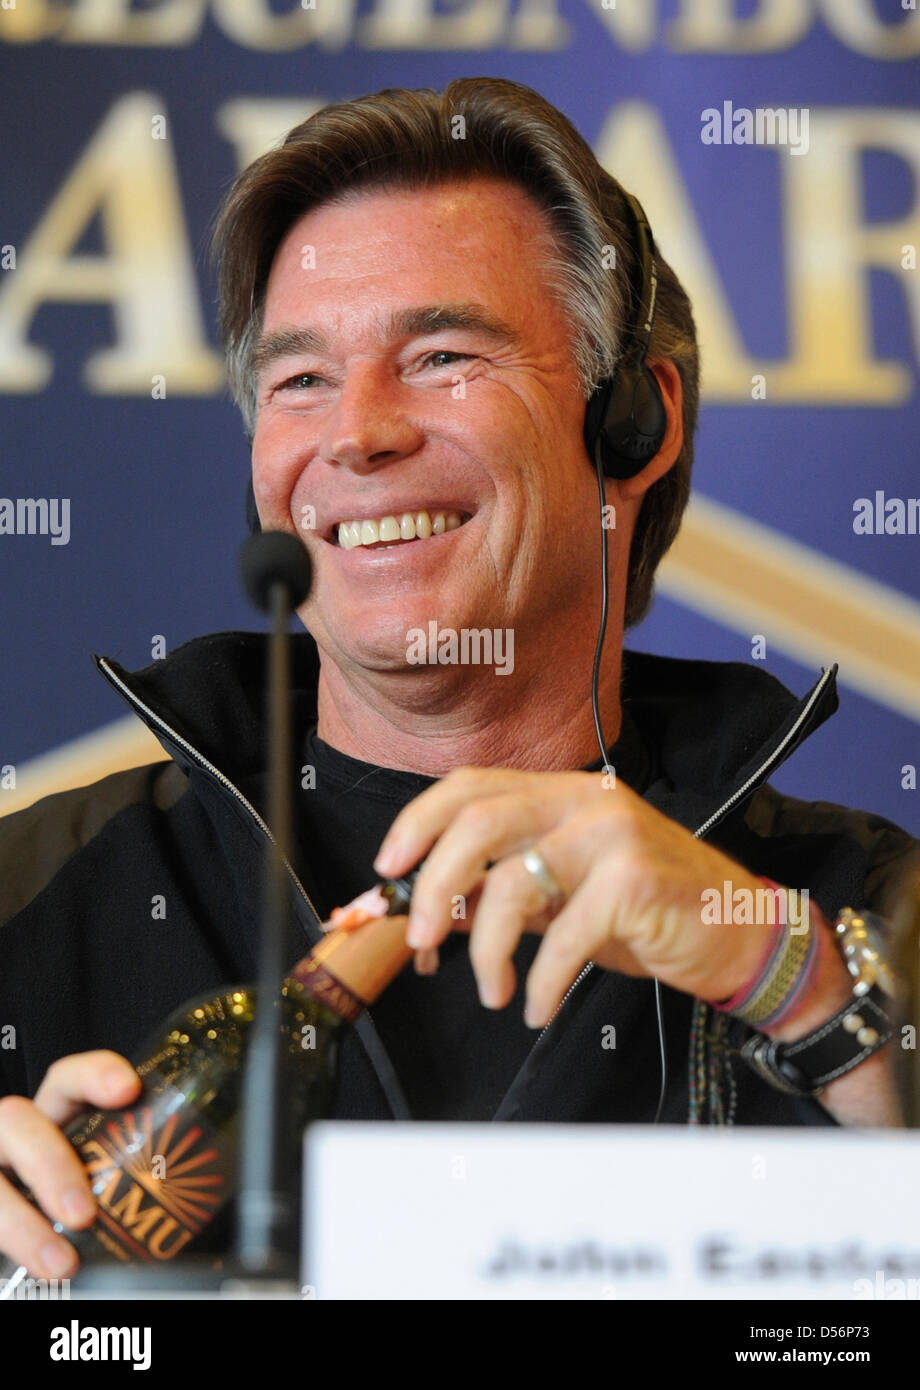 John Easterling, husband of English-born singer and actress Olivia Newton-John, pictured during a press conference in Karlsruhe, Germany, 18 March 2010. Newton-John will receive the honourary award Charity and Entertainment by Radio Regenbogen on 19 March. Photo: ULI DECK Stock Photo